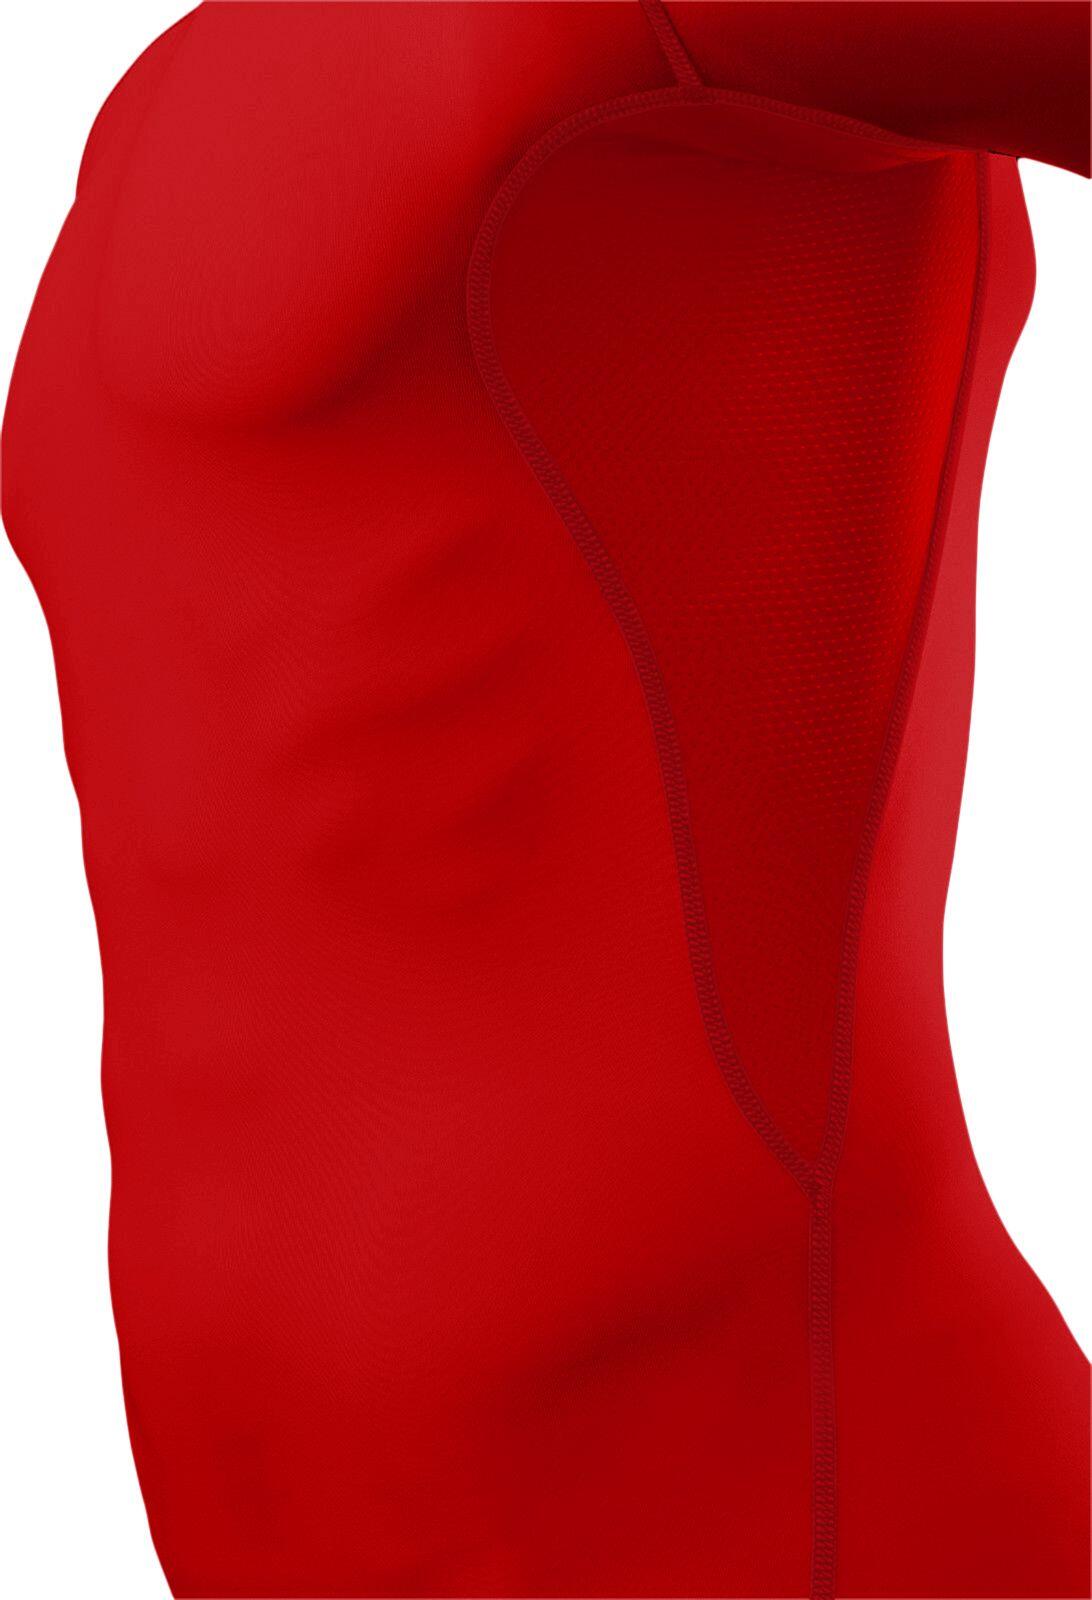 Men's HyperFusion Breathable Base Layer Compression T-shirt - High Risk Red 5/5